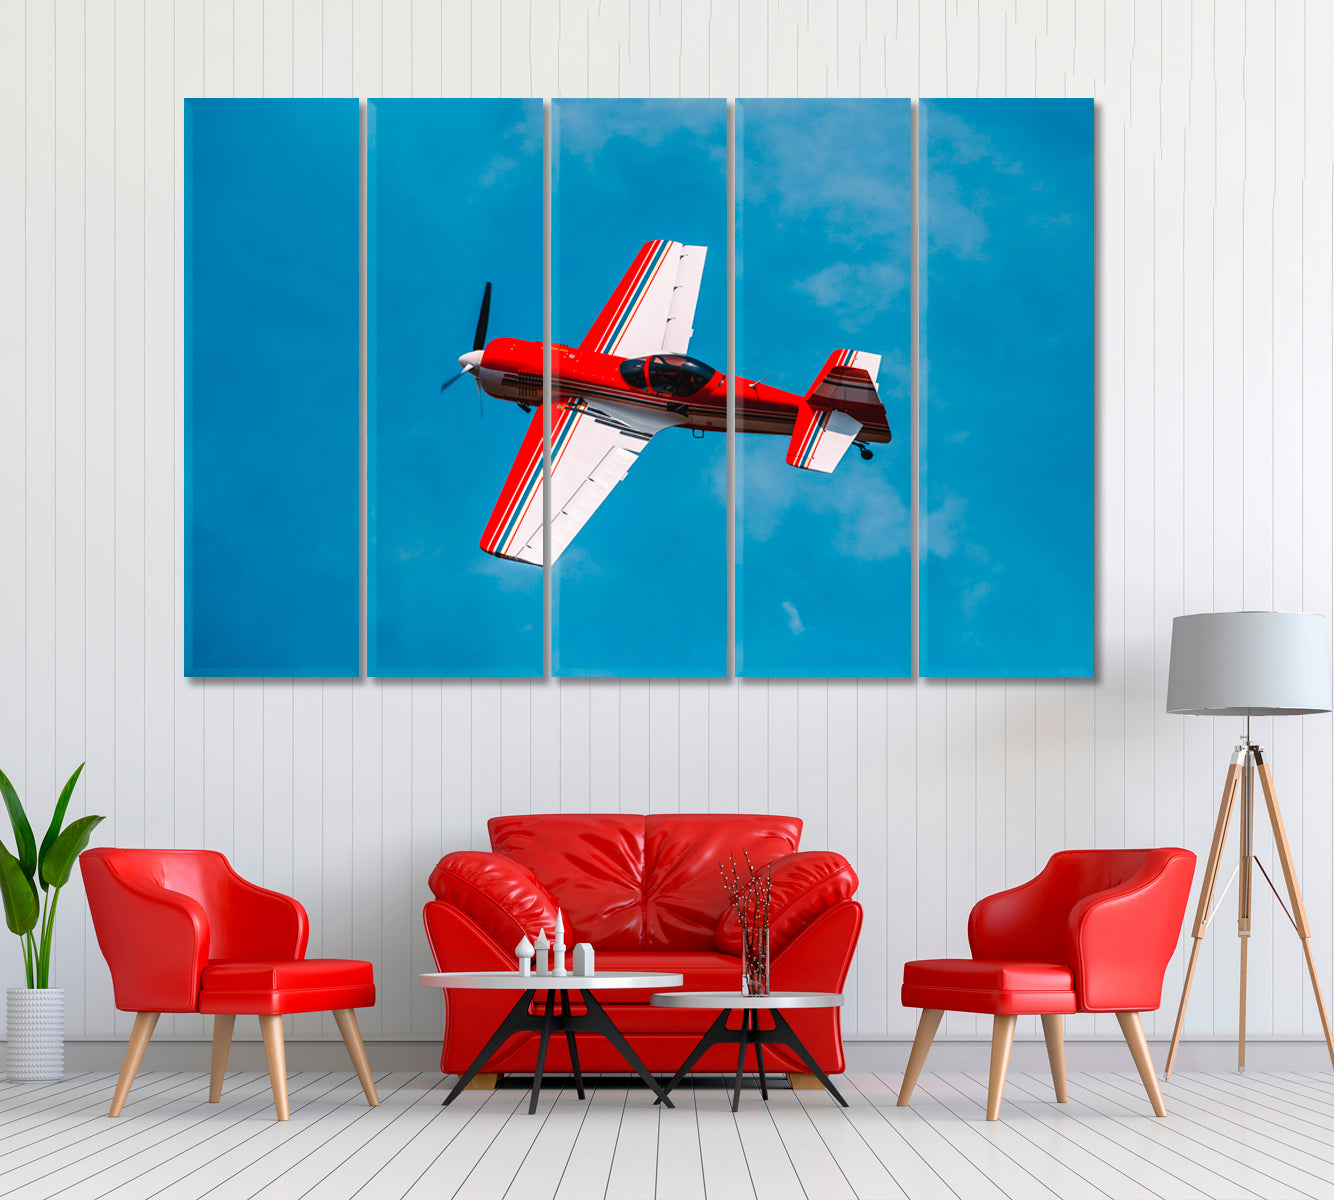 Plane Flying in Sky Canvas Print ArtLexy 5 Panels 36"x24" inches 